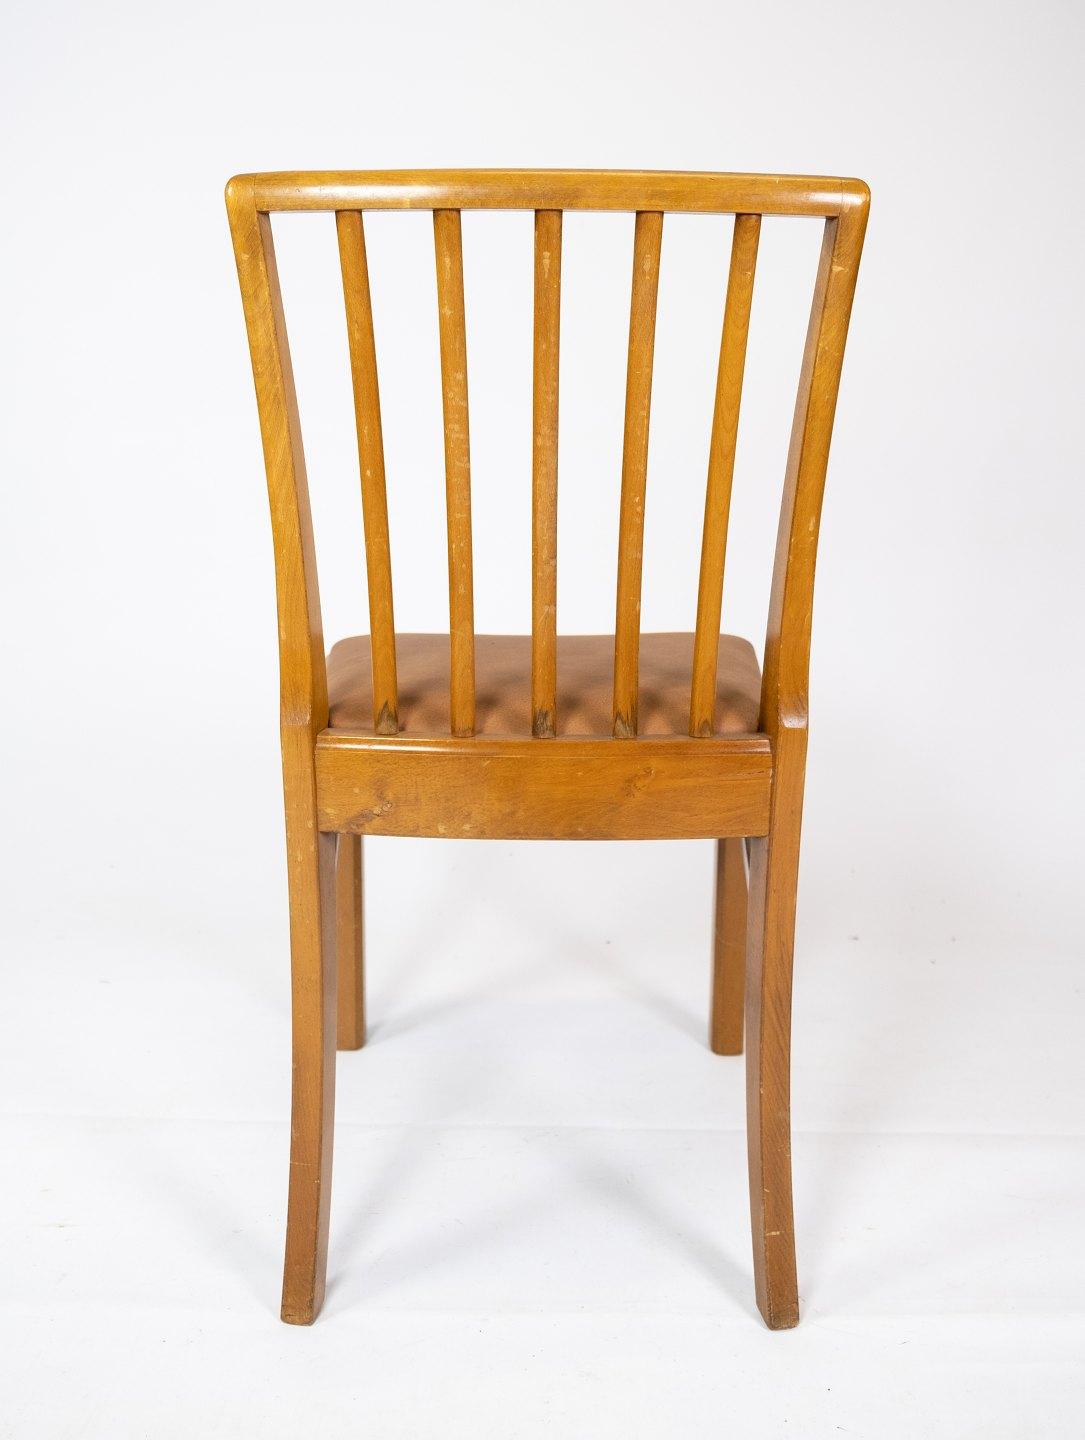 Art Deco Set of 10 Dining Room Chairs of Light Wood and Cognac Leather, 1940s For Sale 3